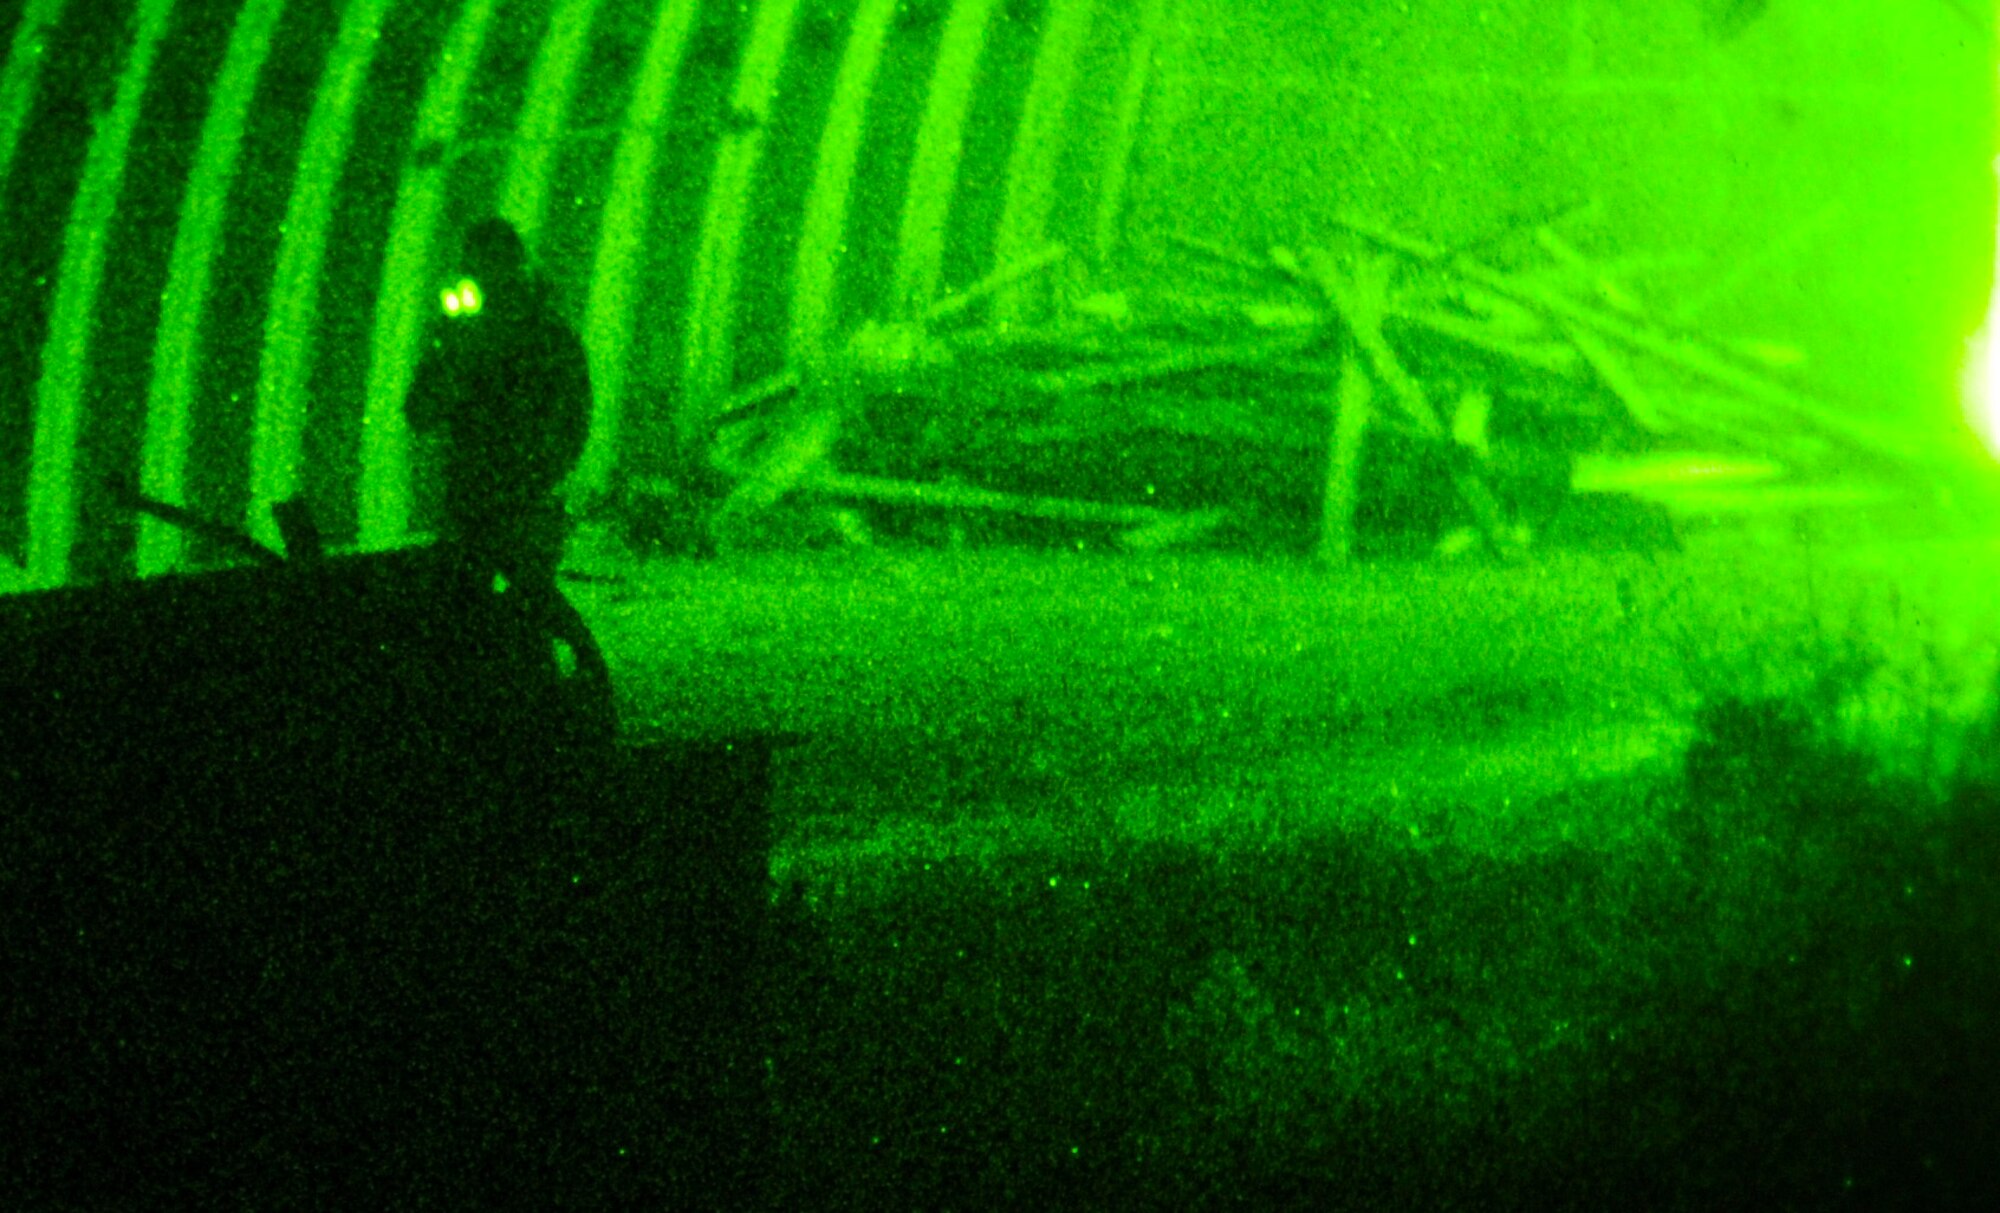 An opposing forces member patrols a hardened aircraft shelter during a night exercise on Eglin Range, Fla., Feb. 20, 2014. Opposing forces members simulated resistance for the ground forces to provide realistic training. (U.S. Air Force photo/Senior Airman Michelle Vickers)